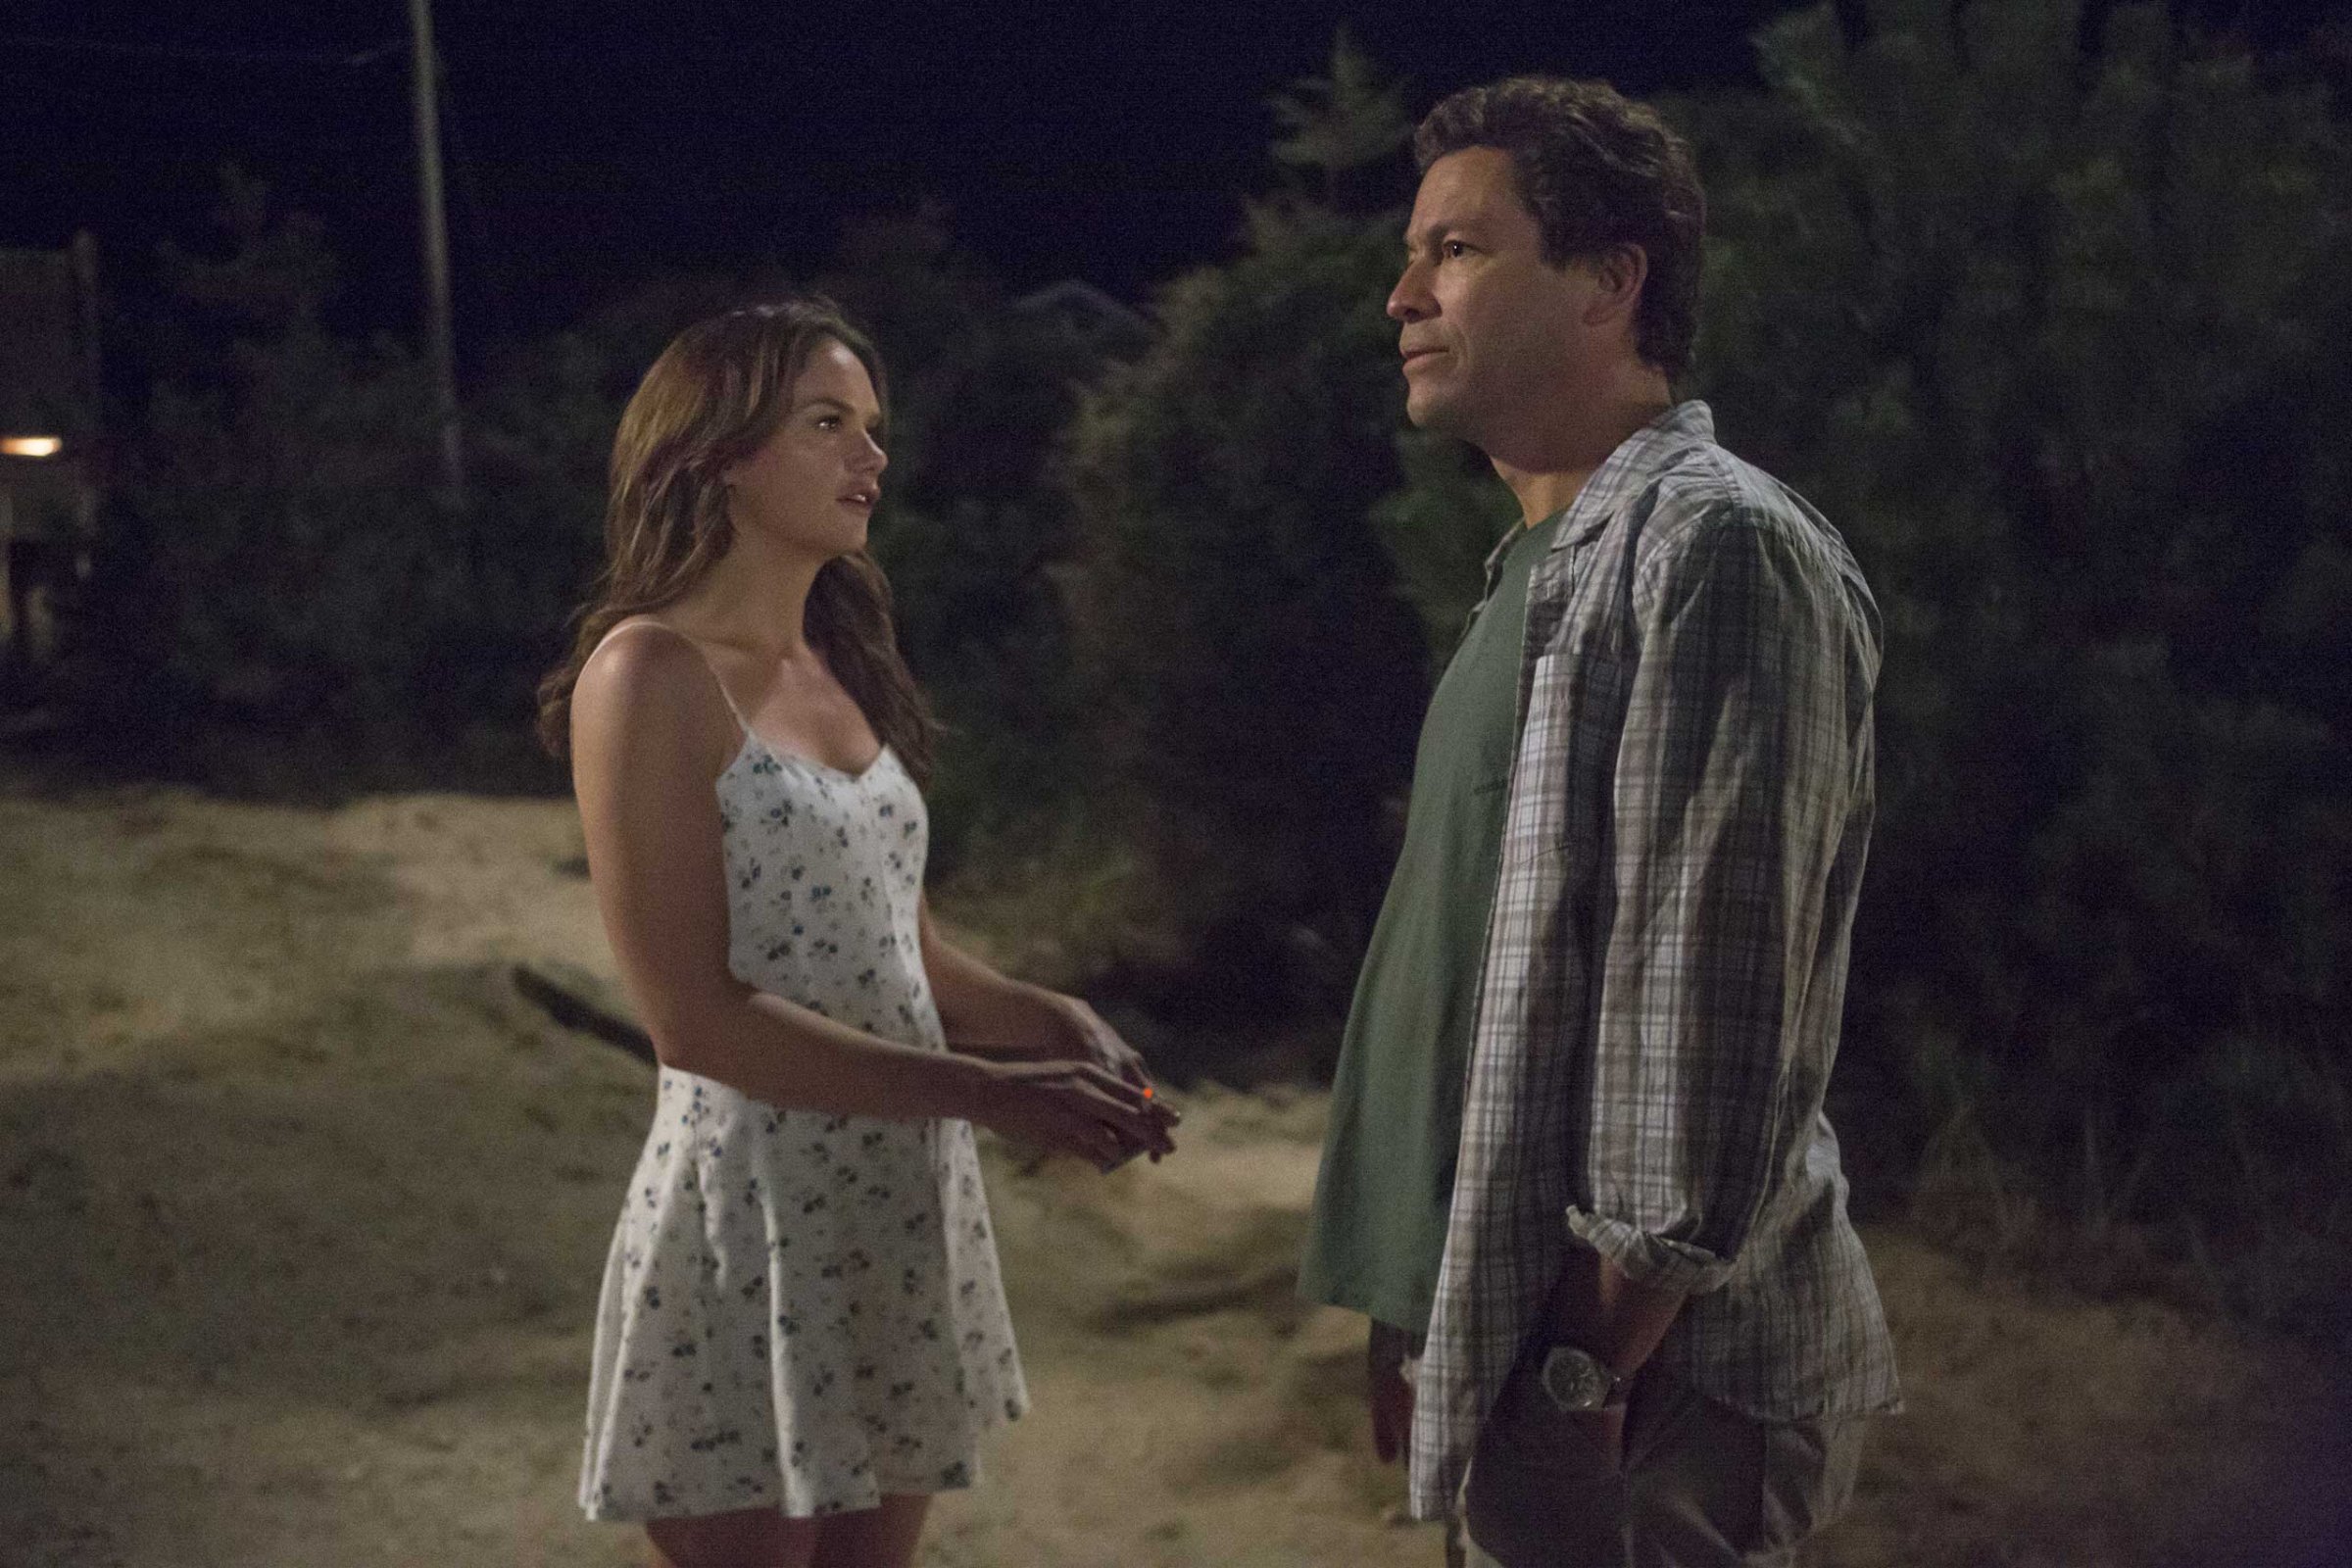 Ruth Wilson as Alison and Dominic West as Noah in The Affair.